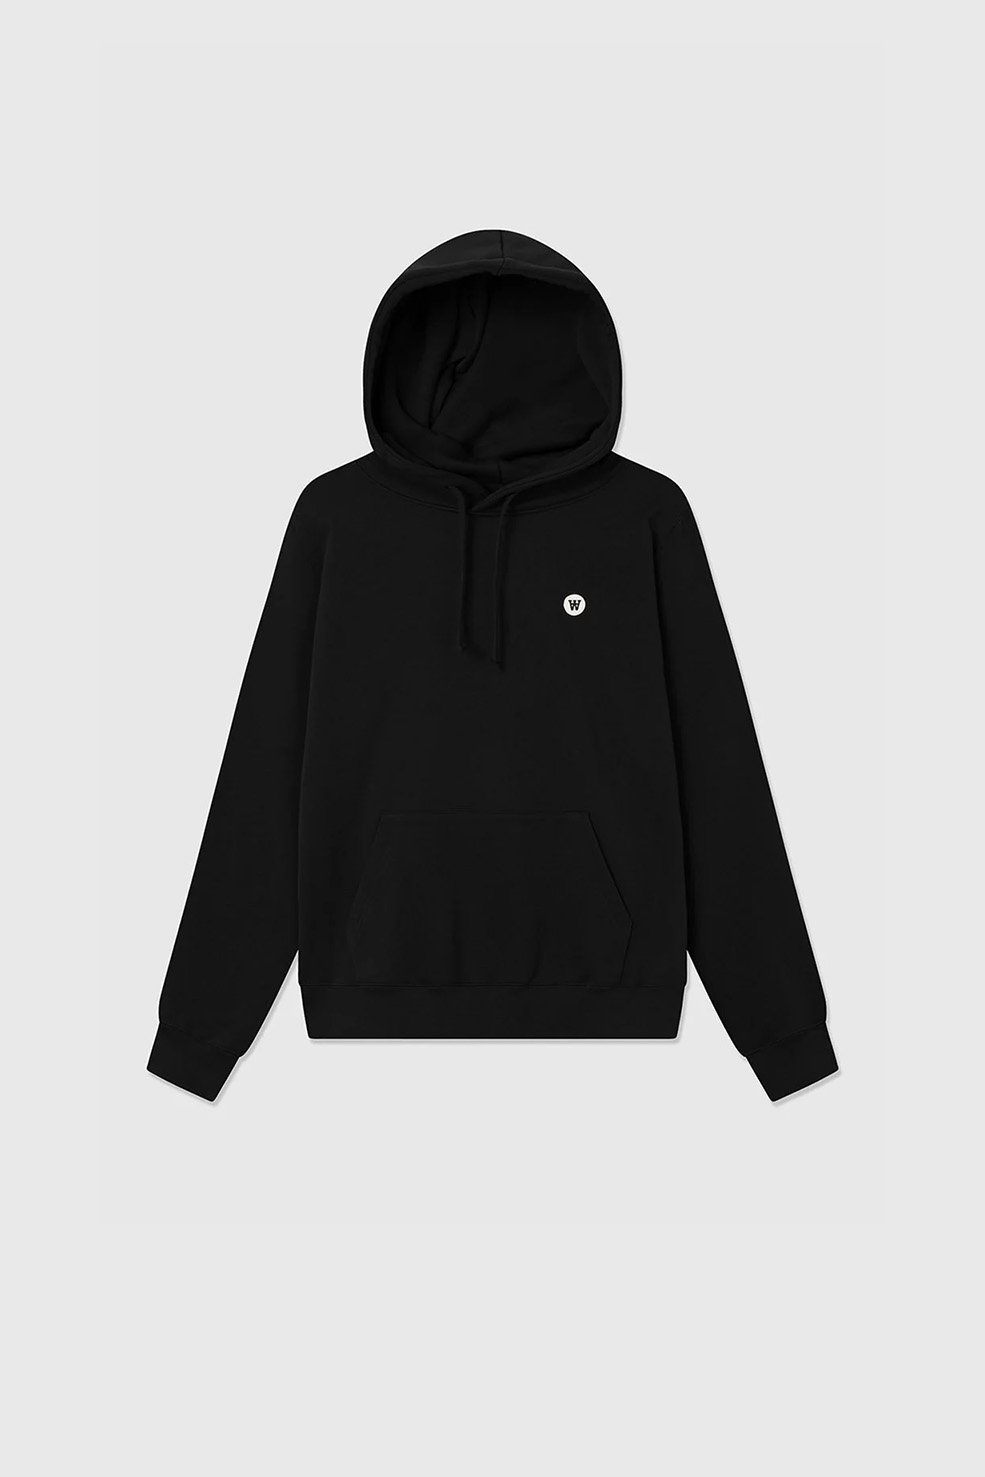 Double A by Wood Wood Ash hoodie Black | WoodWood.com